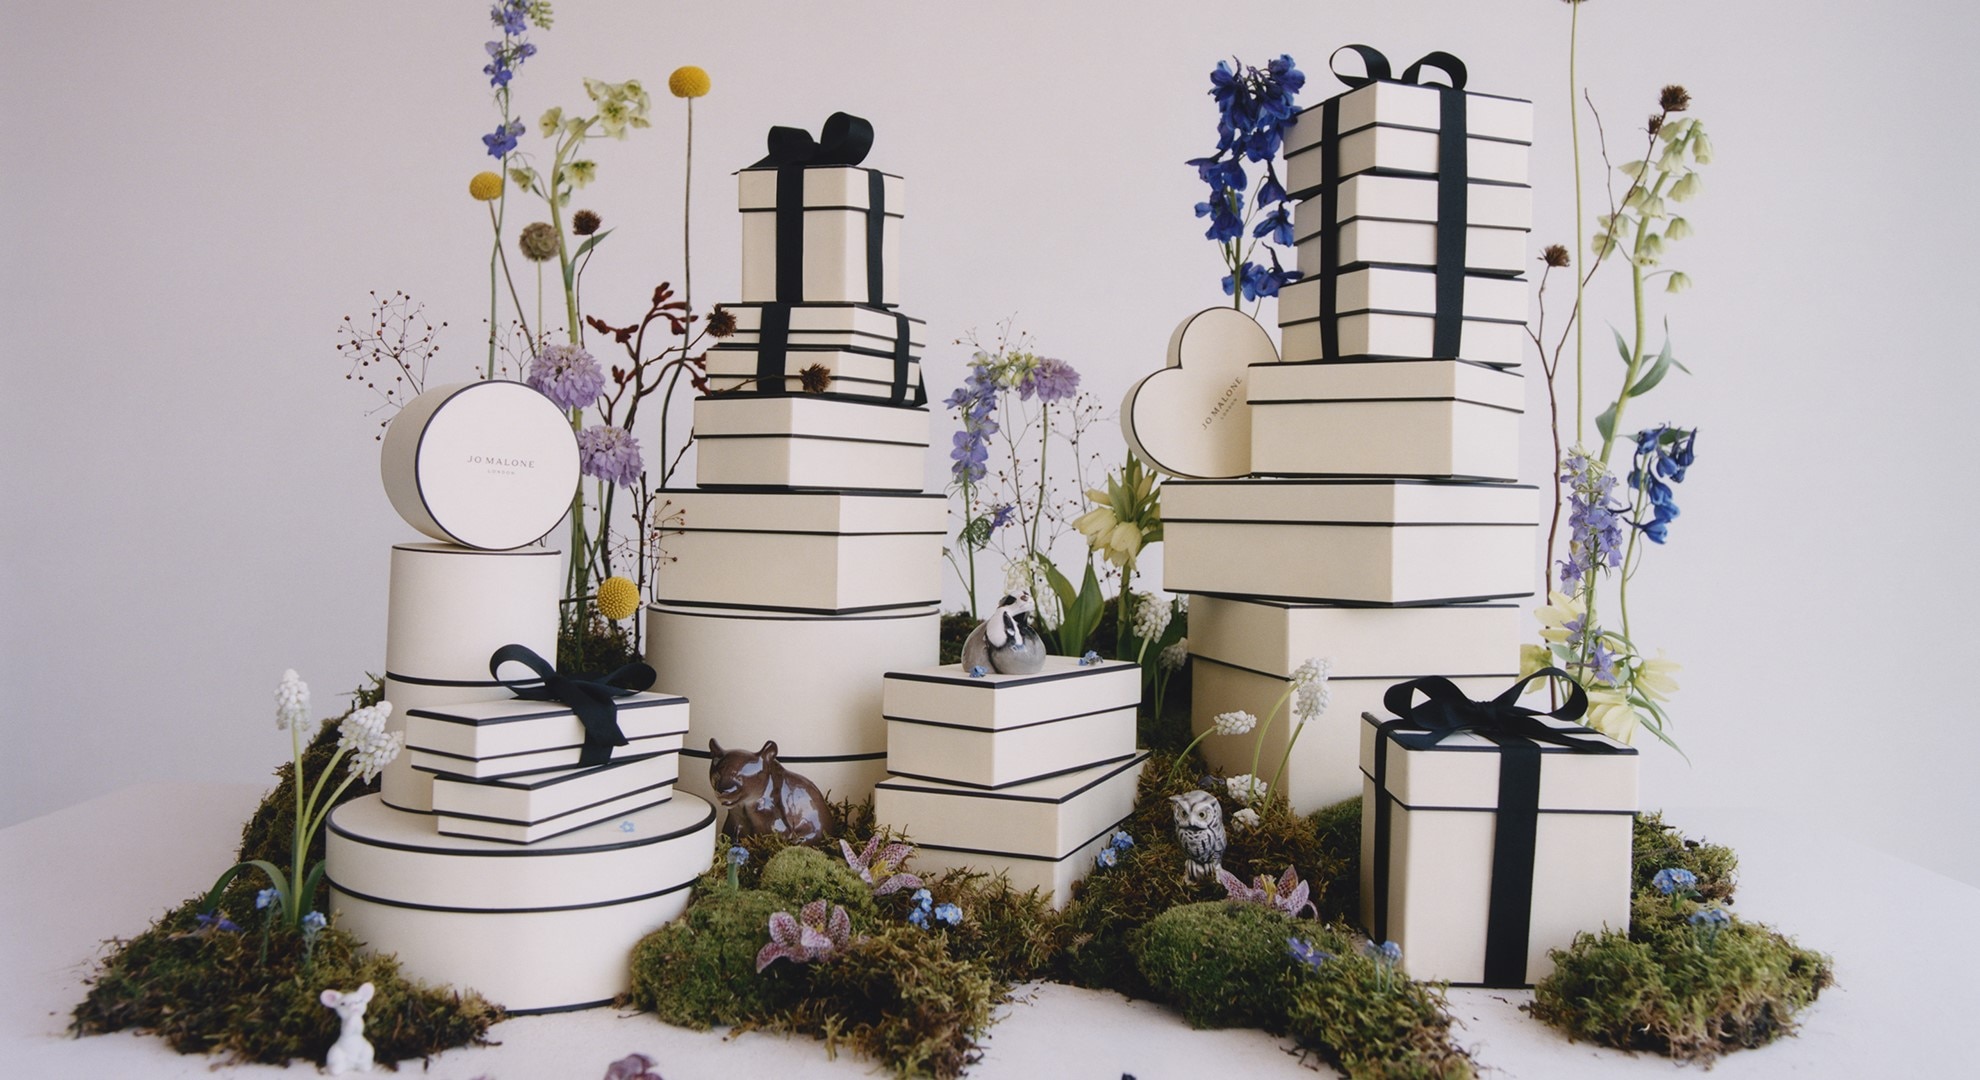 Jo Malone London Gift Boxes stacked up, surrounded by greenery and flowers